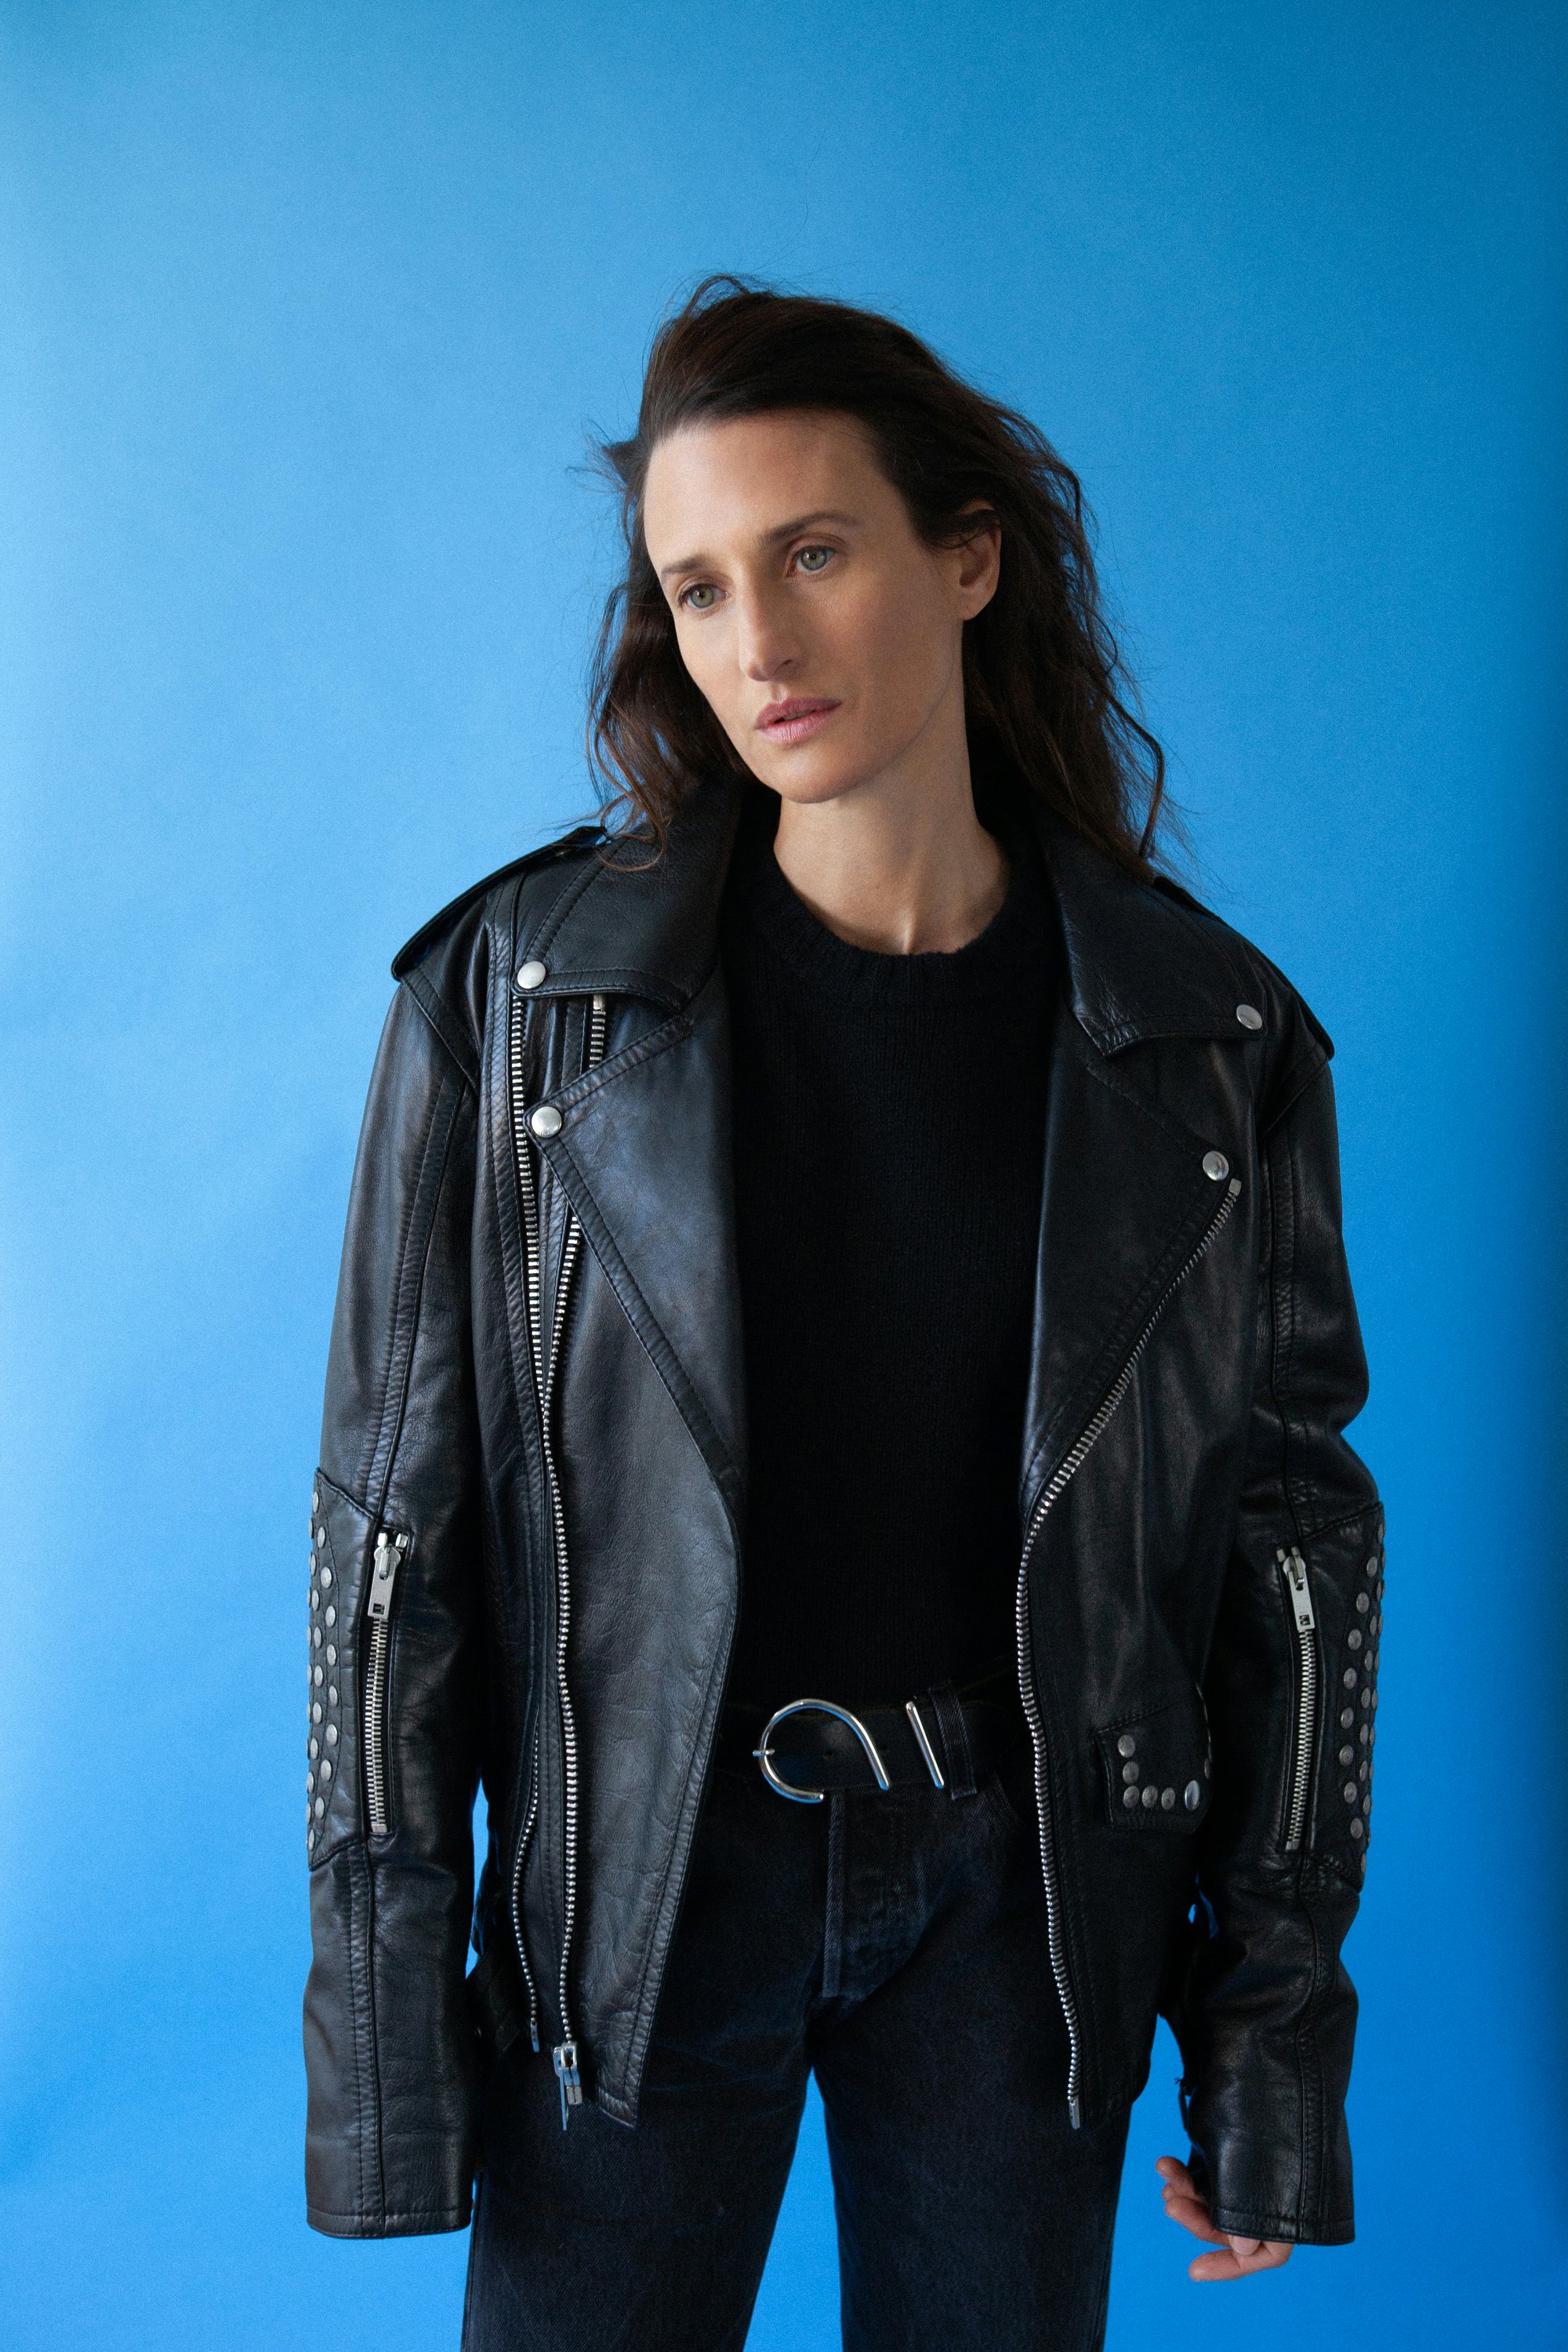 Call My Agent!'s Camille Cottin on becoming a sex symbol in her